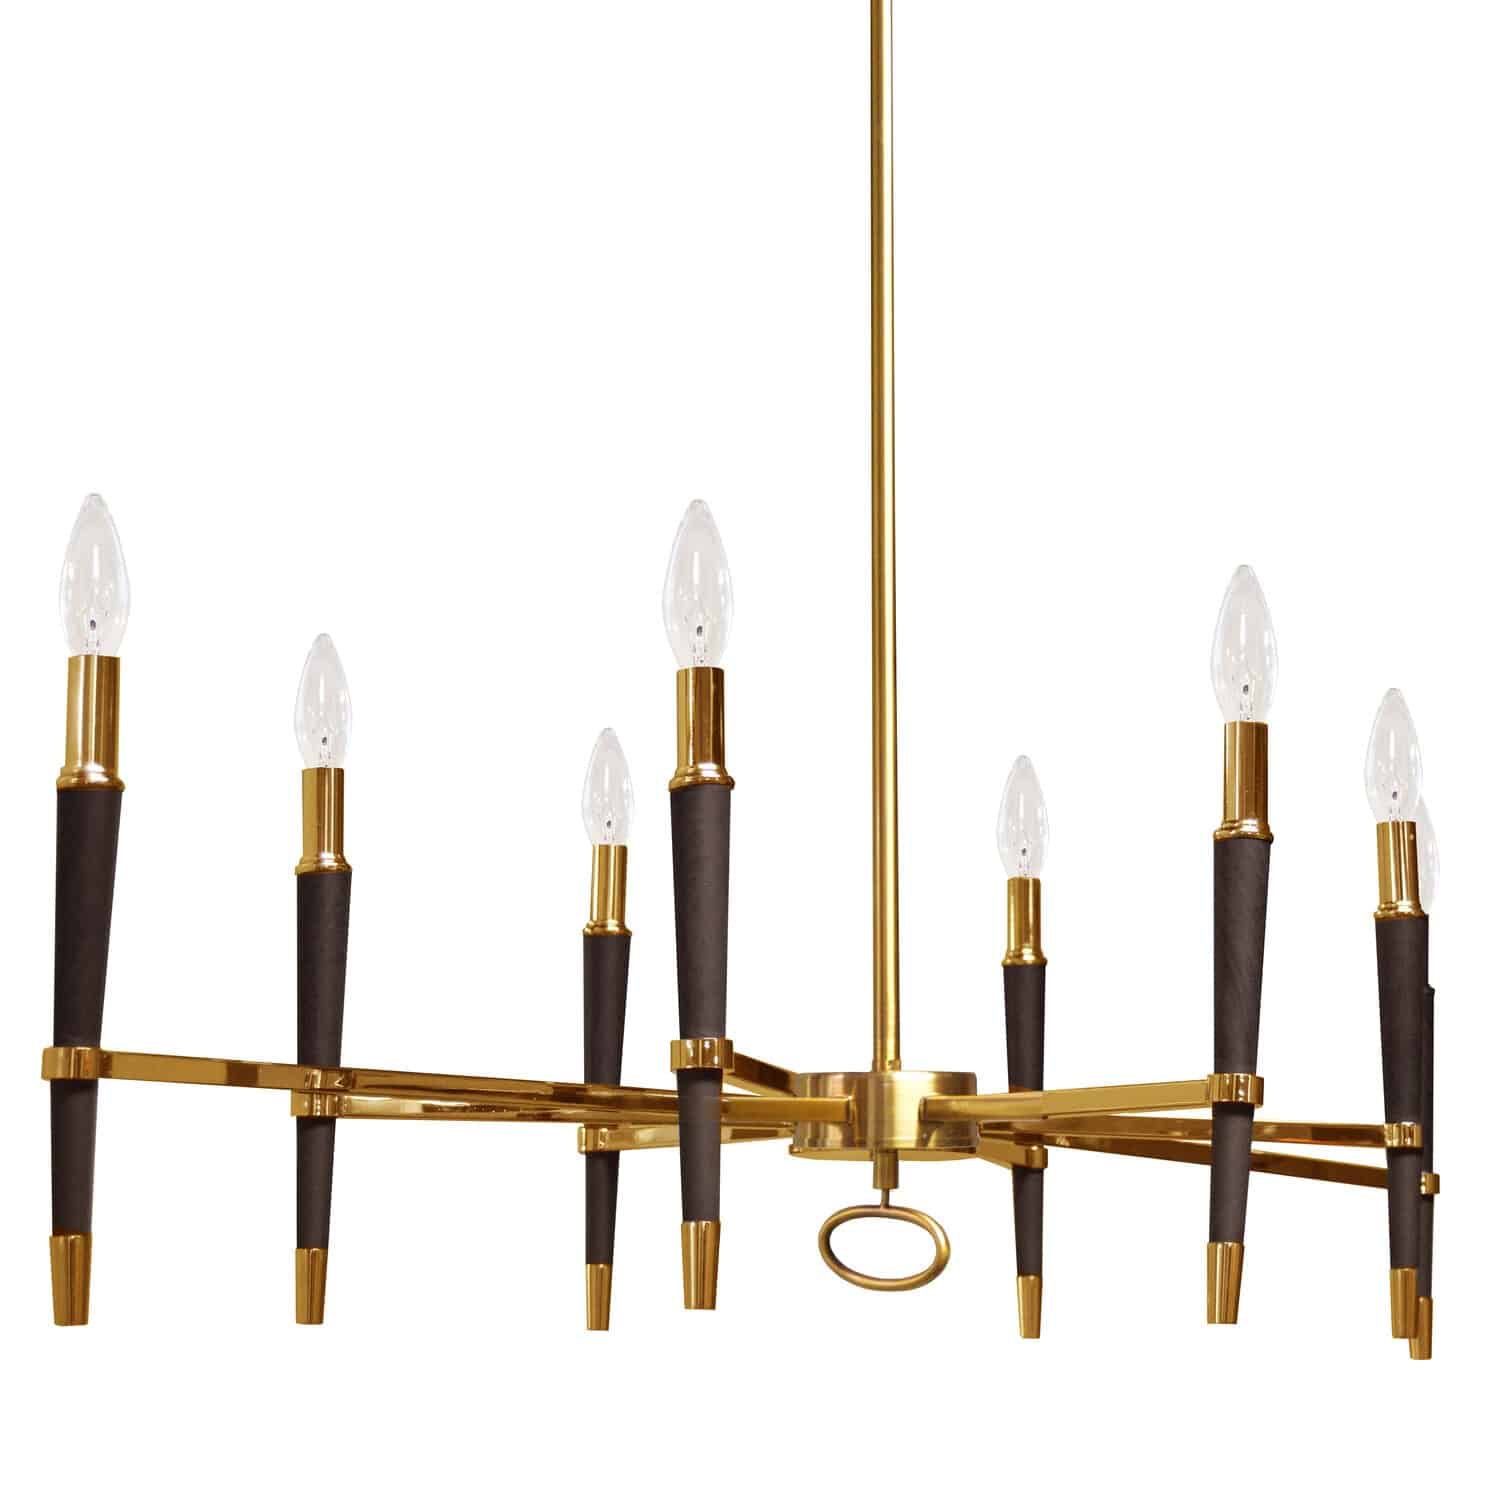 Combining elements of both traditional and modern styles, the Langford family of lighting is boldly understated. Sophisticated and versatile, it's available in configurations to suit any size space. The horizontal or compact chandelier frame is crafted in metal, with a choice of finishes contrasting the arms of the design. The lights are set vertically, with traditional flame-like bulbs. An optional fabric shade creates a more subtle glow. There's a Langford light that's perfect for your mid-century to contemporary dining room, living room or kitchen.